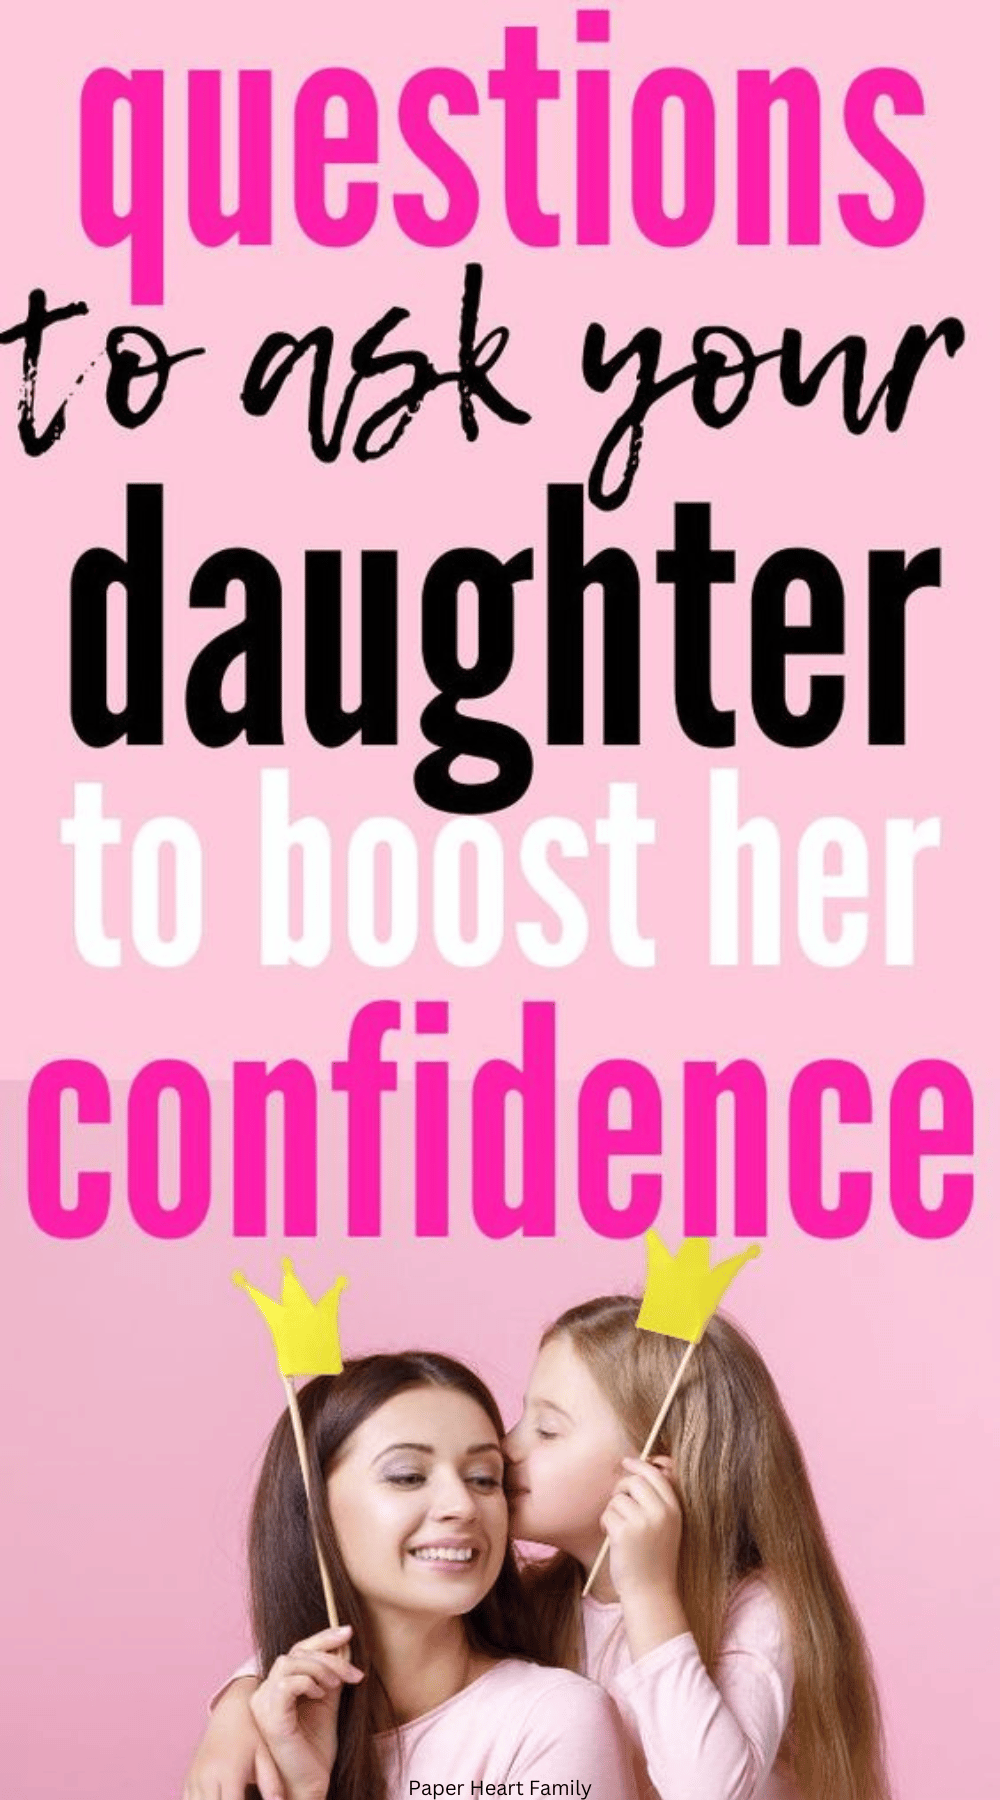 What To Say To Your Daughter To Boost Her Confidence